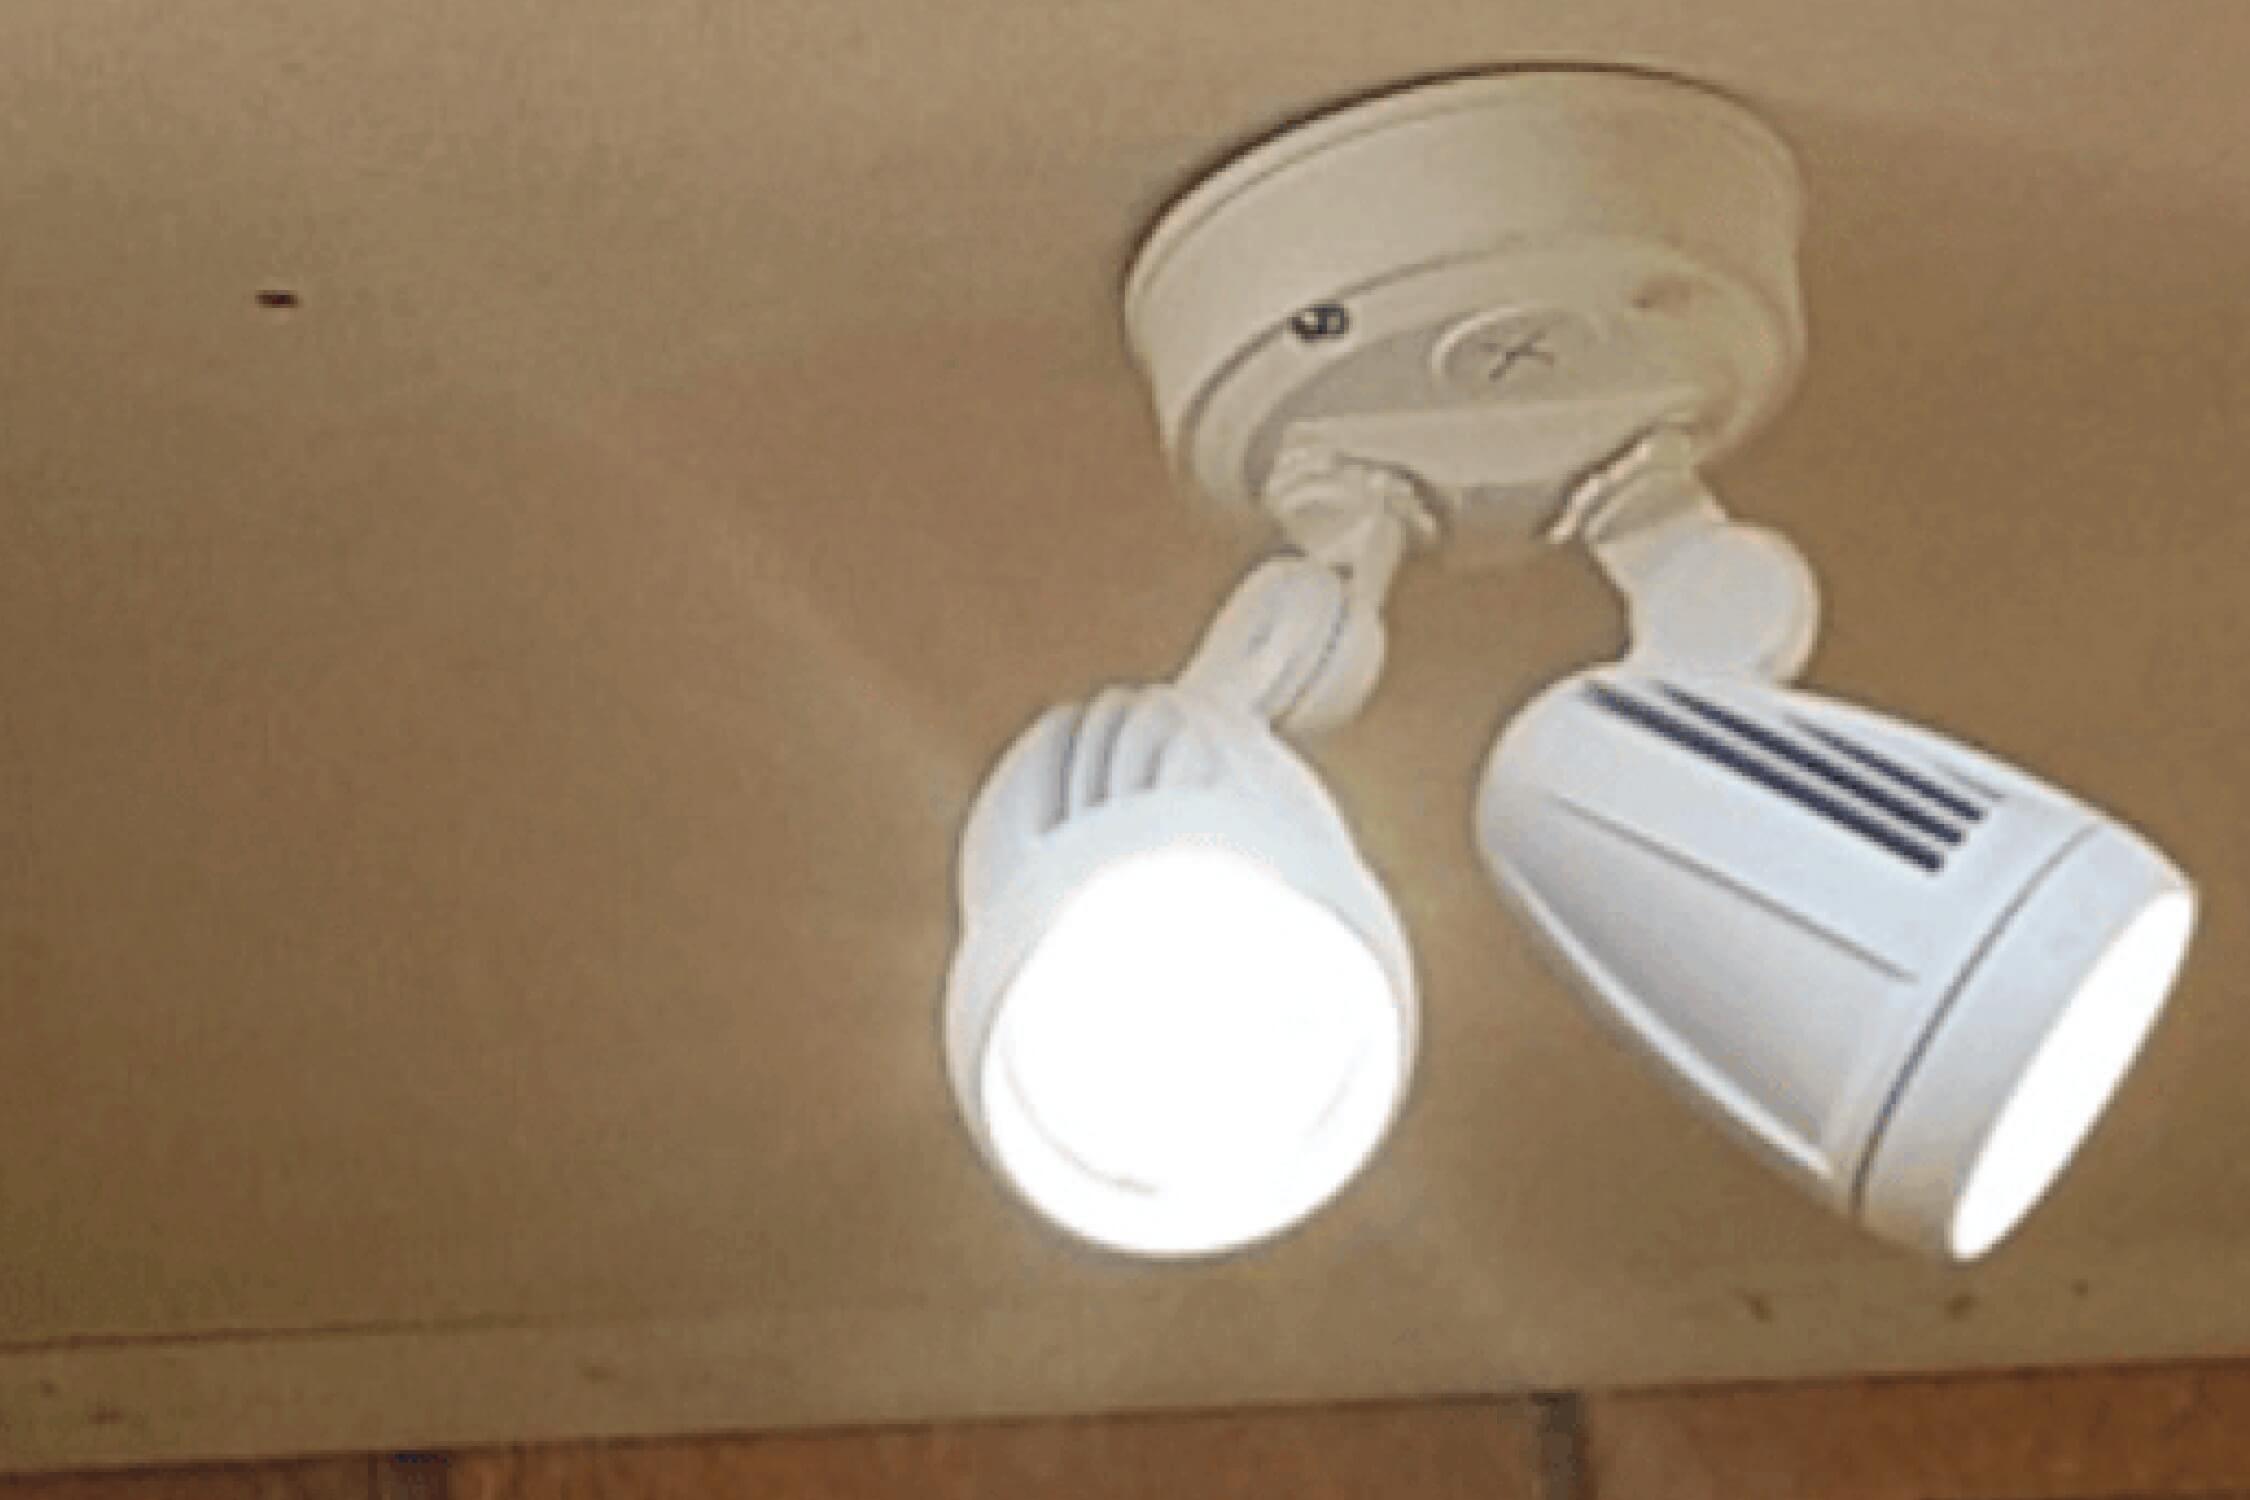 Security lights that really work